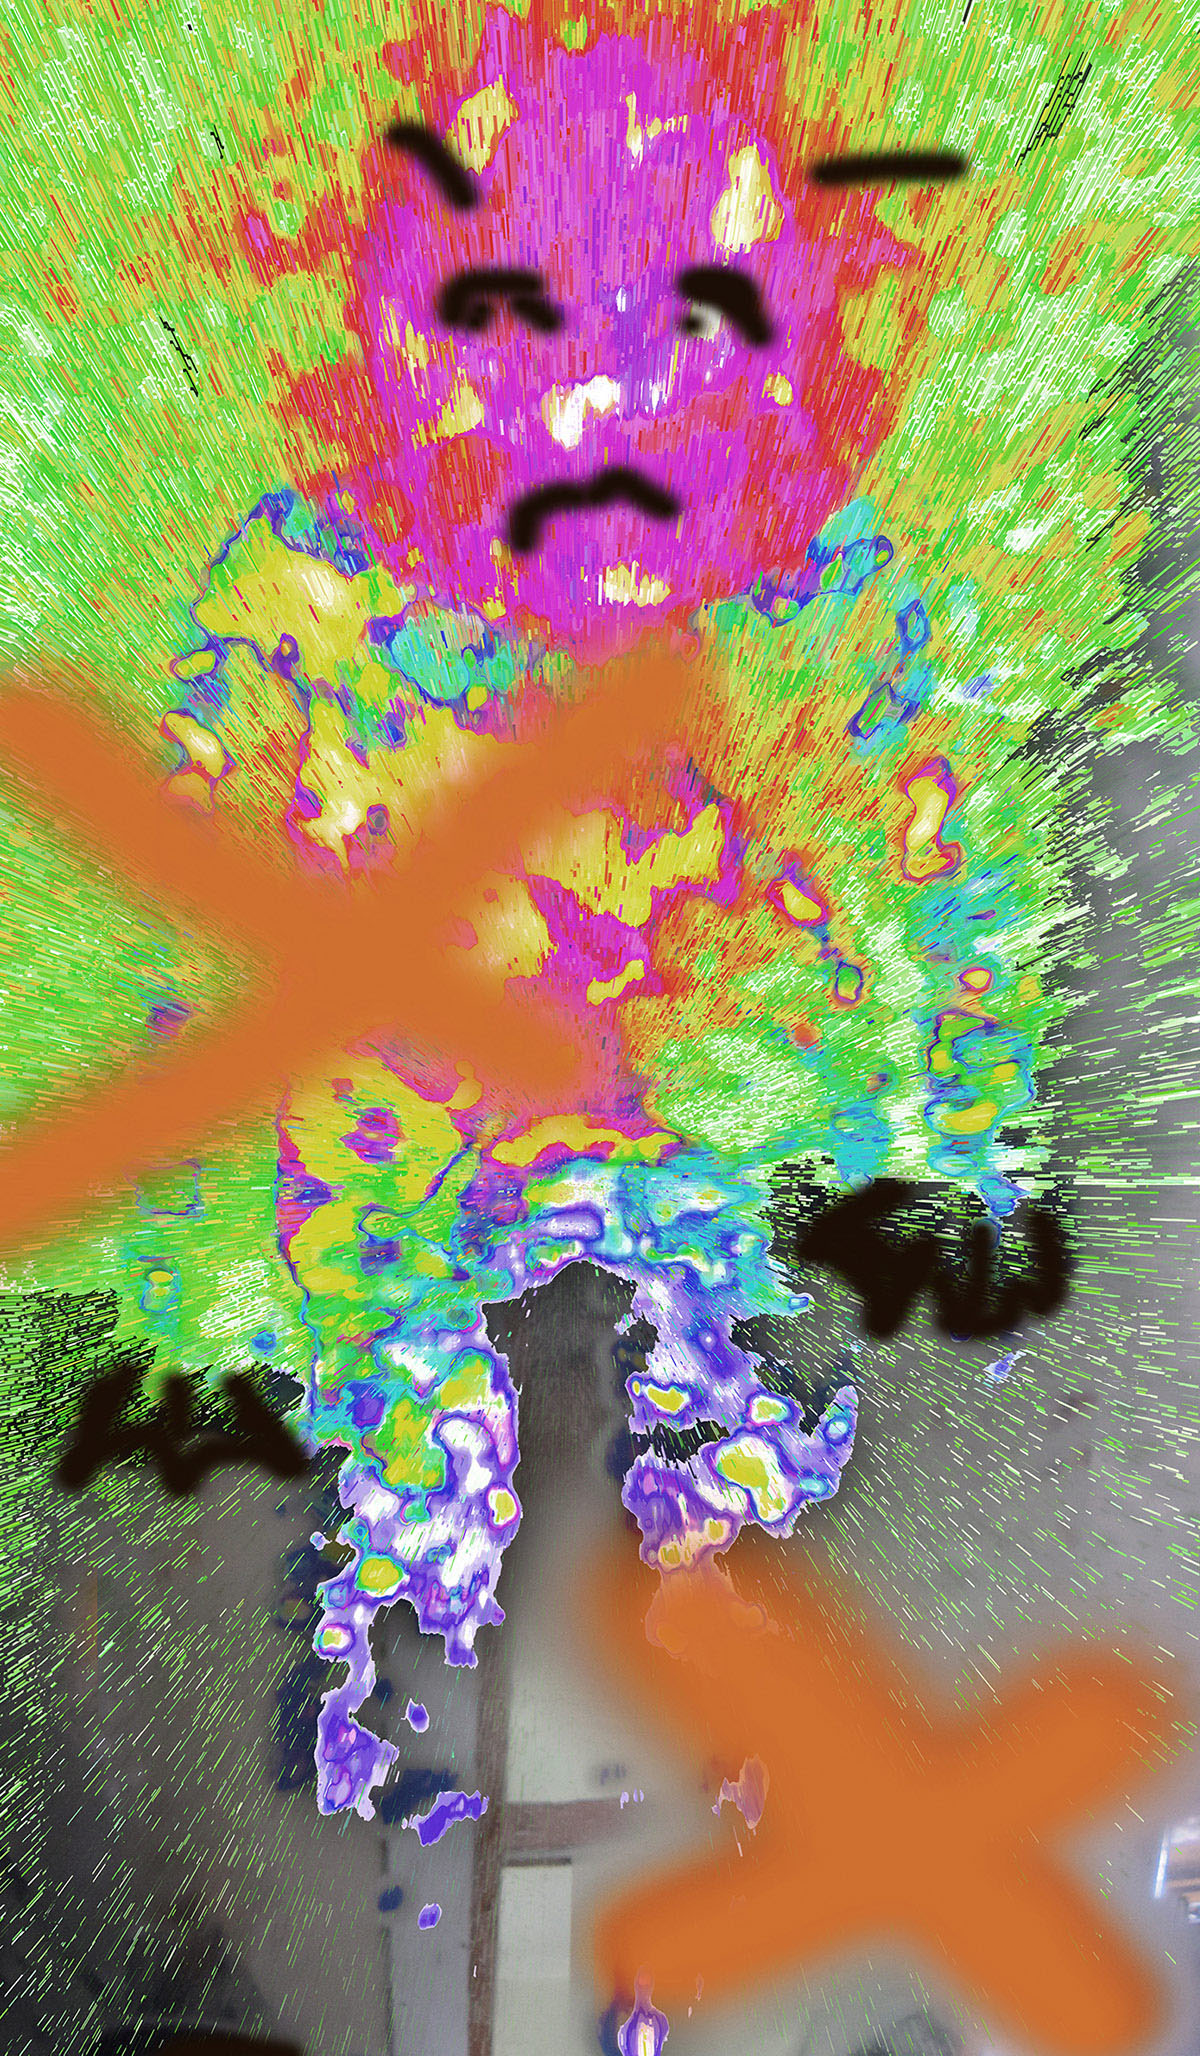 colorful abstract digital frog image